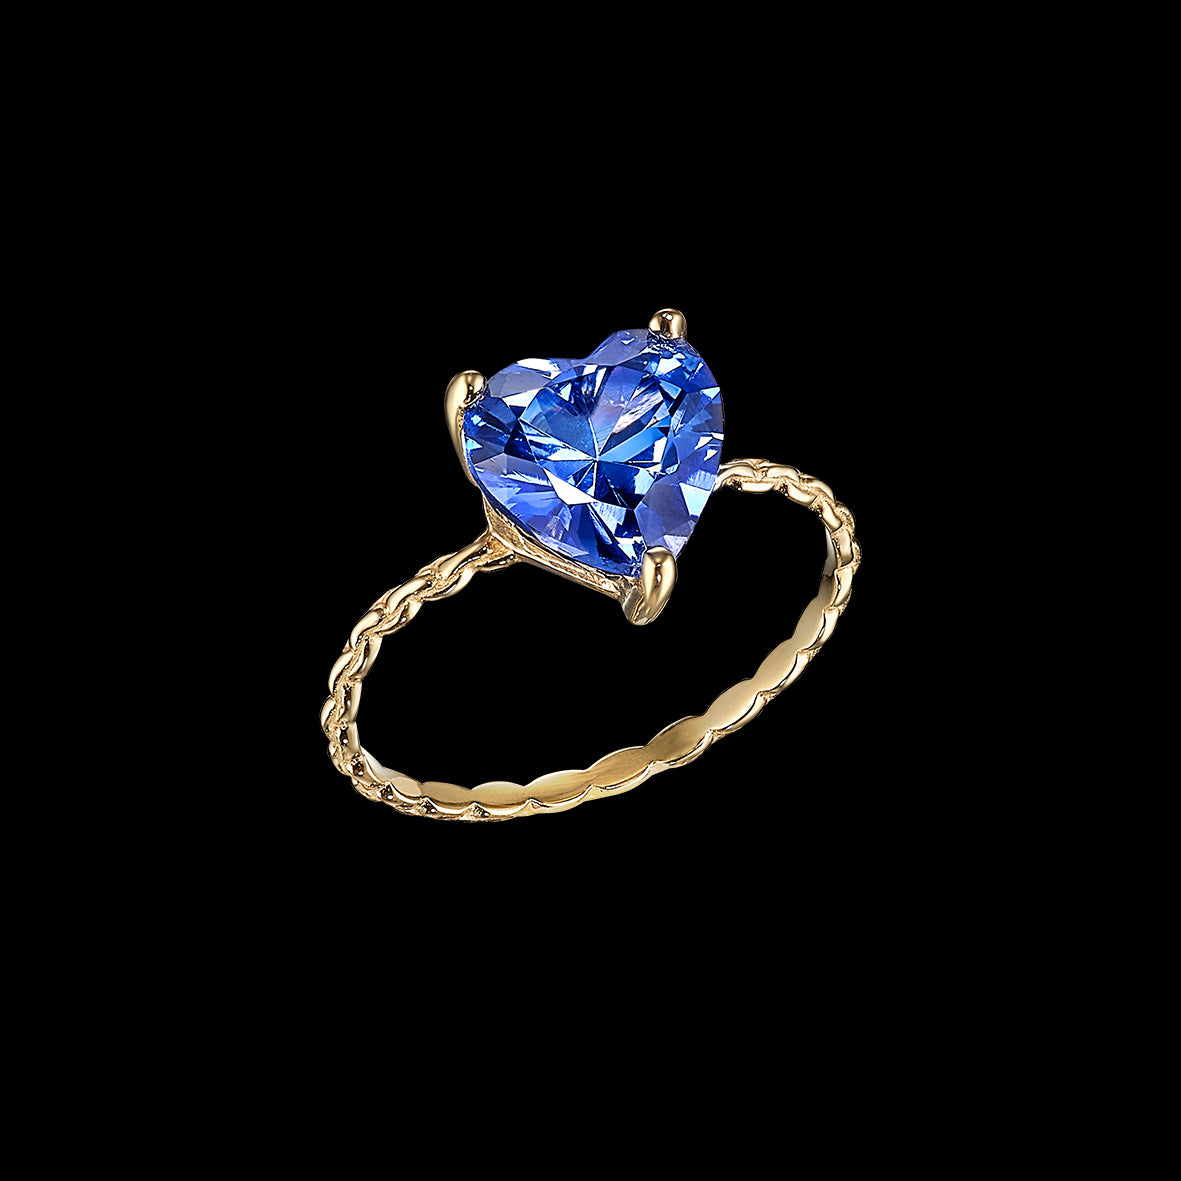 Mini Blue Sapphire Heart Ring, Ring, Anabela Chan Joaillerie - Fine jewelry with laboratory grown and created gemstones hand-crafted in the United Kingdom. Anabela Chan Joaillerie is the first fine jewellery brand in the world to champion laboratory-grown and created gemstones with high jewellery design, artisanal craftsmanship and a focus on ethical and sustainable innovations.